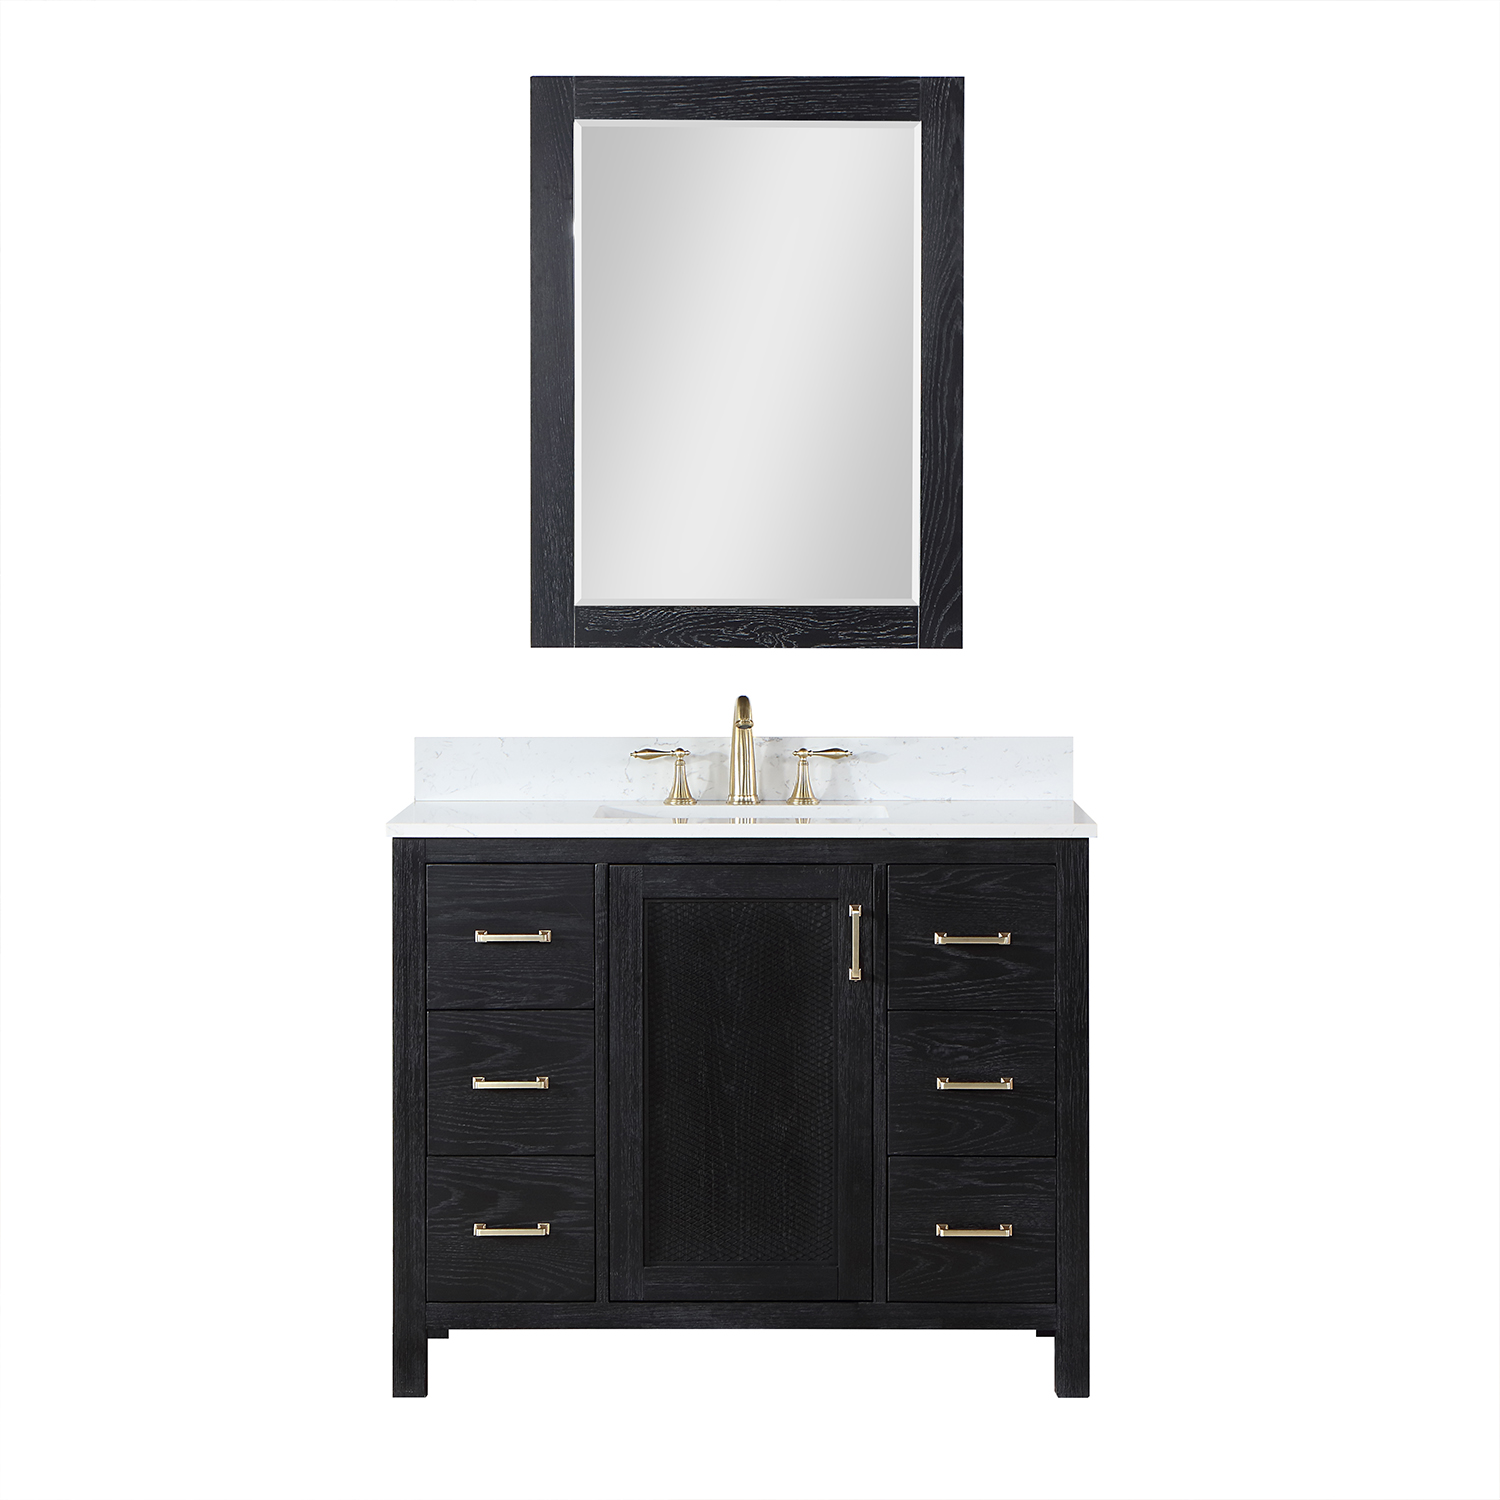 Issac Edwards Collection 42" Single Bathroom Vanity Set in Black Oak with Carrara White Composite Stone Countertop without Mirror 